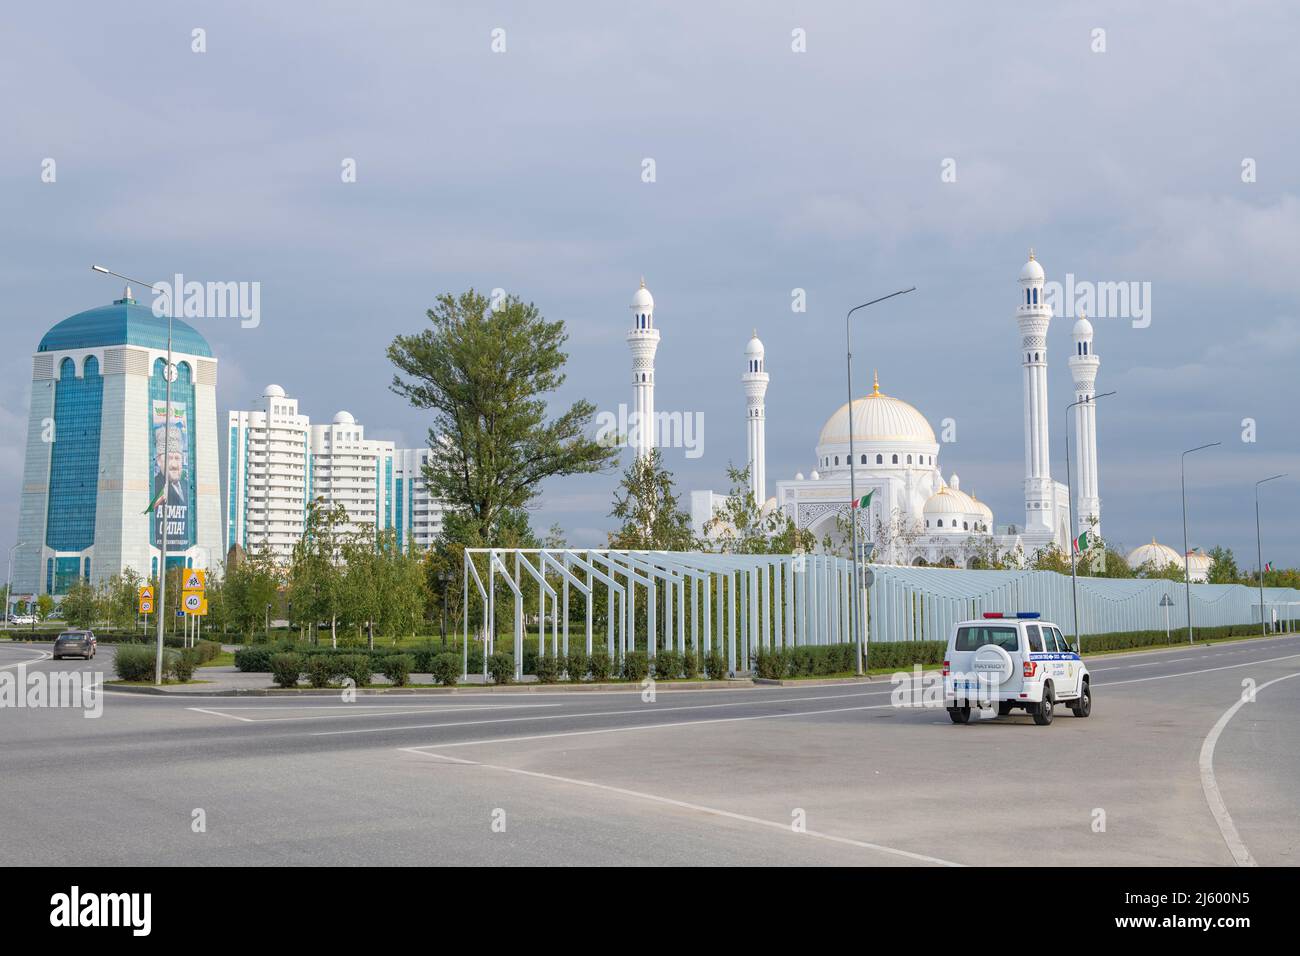 SHALI, RUSSIA - SEPTEMBER 29, 2021: Mosque 'Pride of Muslims' in the cityscape on a September cloudy morning Stock Photo